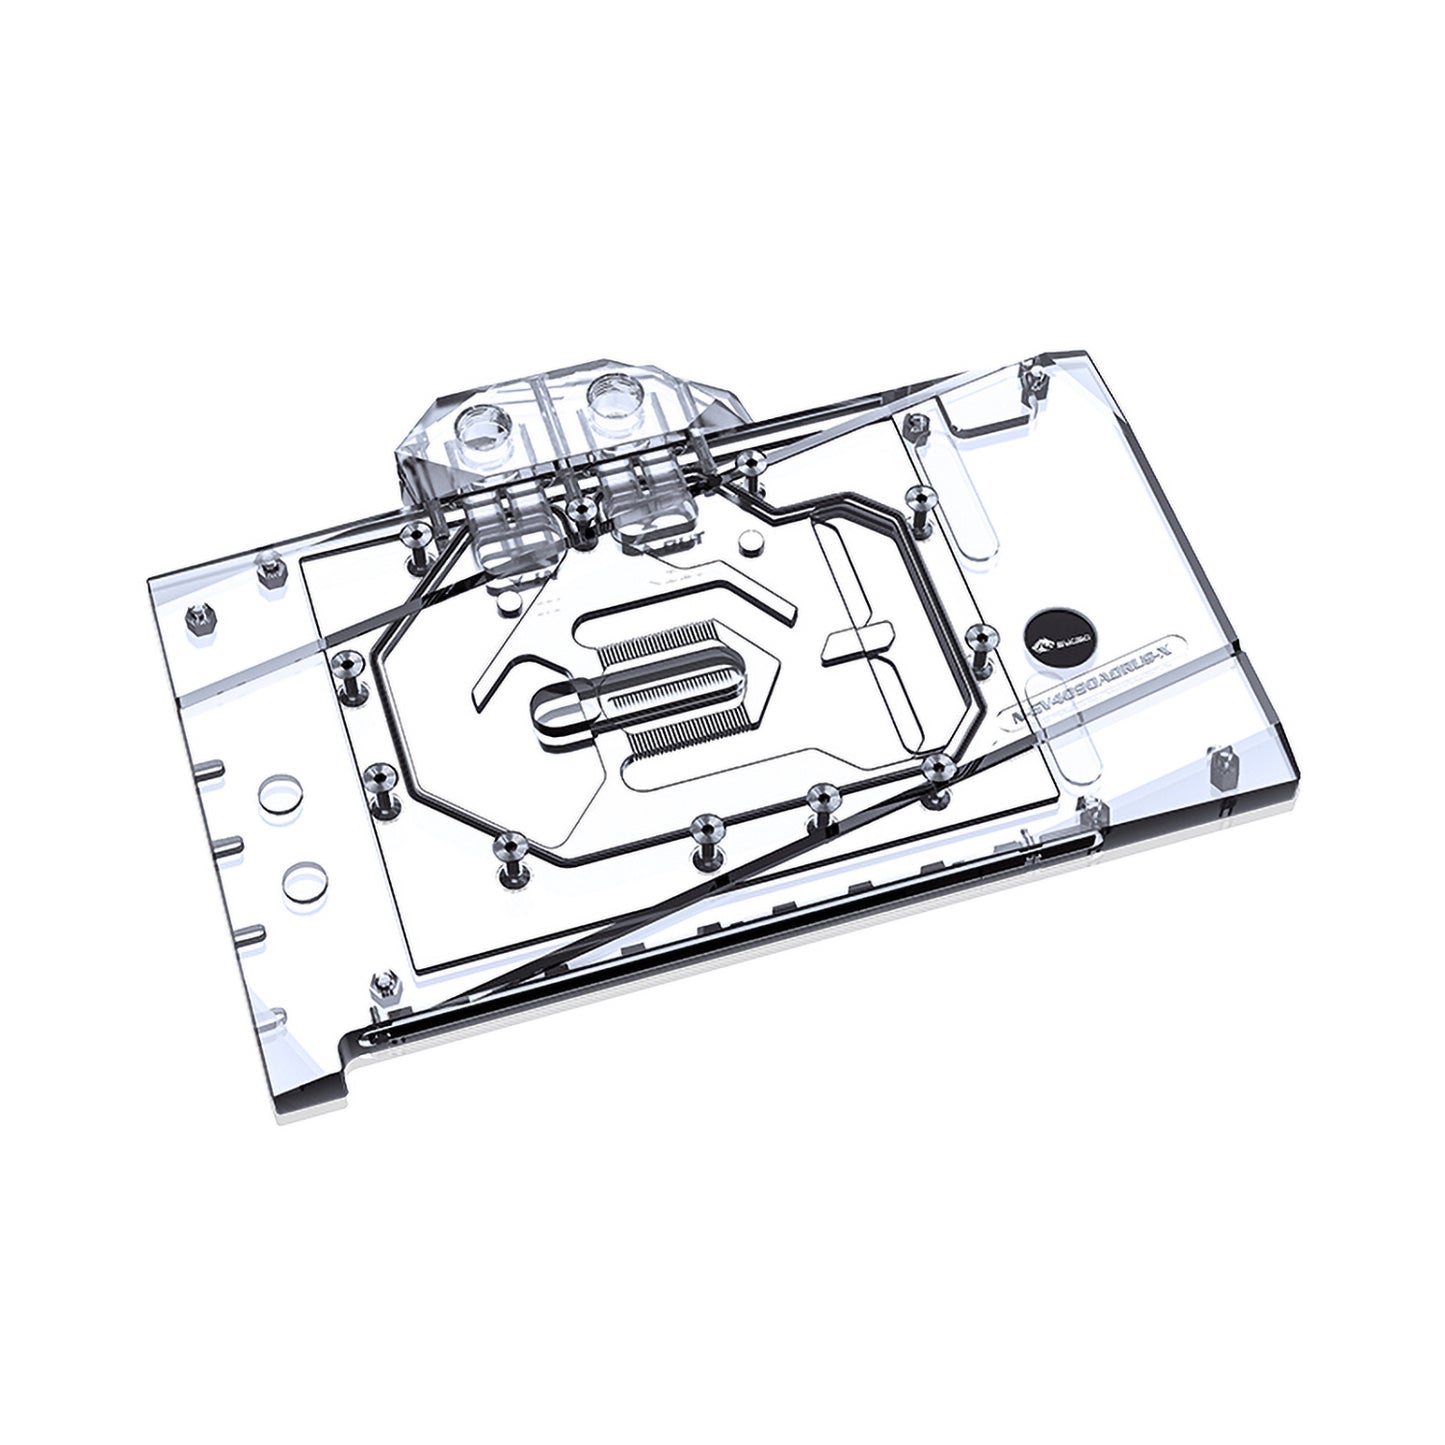 Bykski GPU Water Block For Gigabyte Aorus RTX 4090 Master 24G / Gaming OC 24G, Full Cover With Backplate PC Water Cooling Cooler, N-GV4090AORUS-X